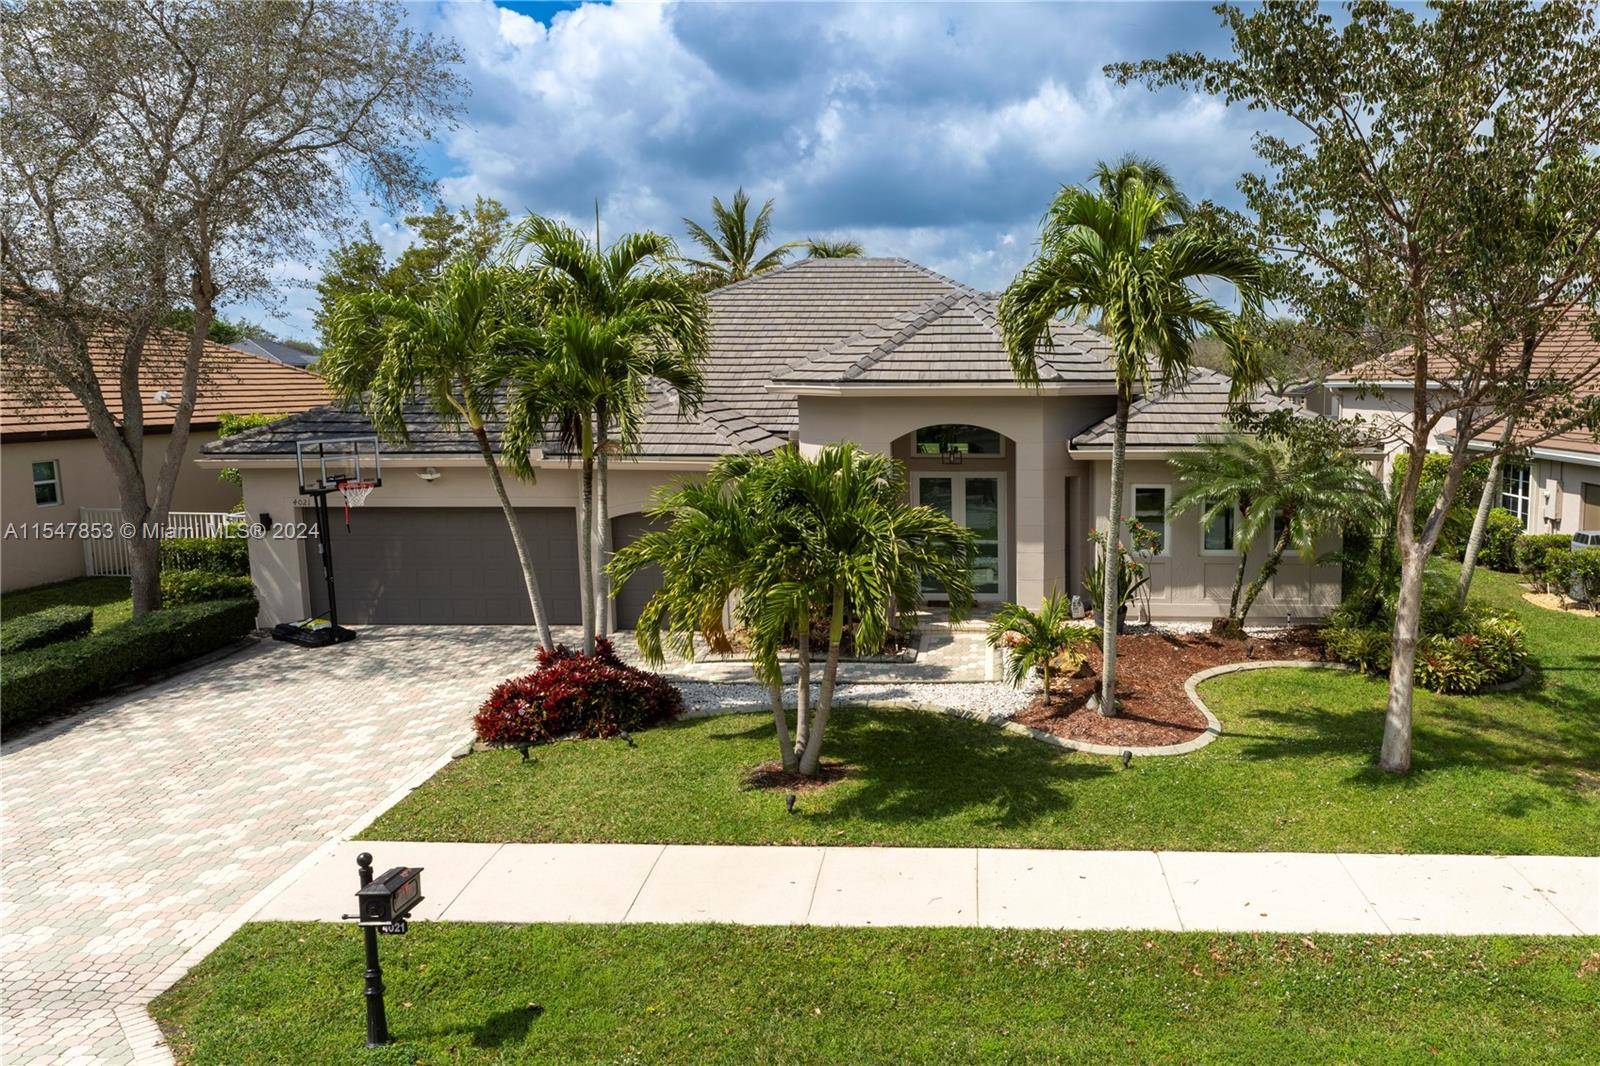 Remodeled single family home with Brand new ROOF in the heart of University Drive in Davie, FL.